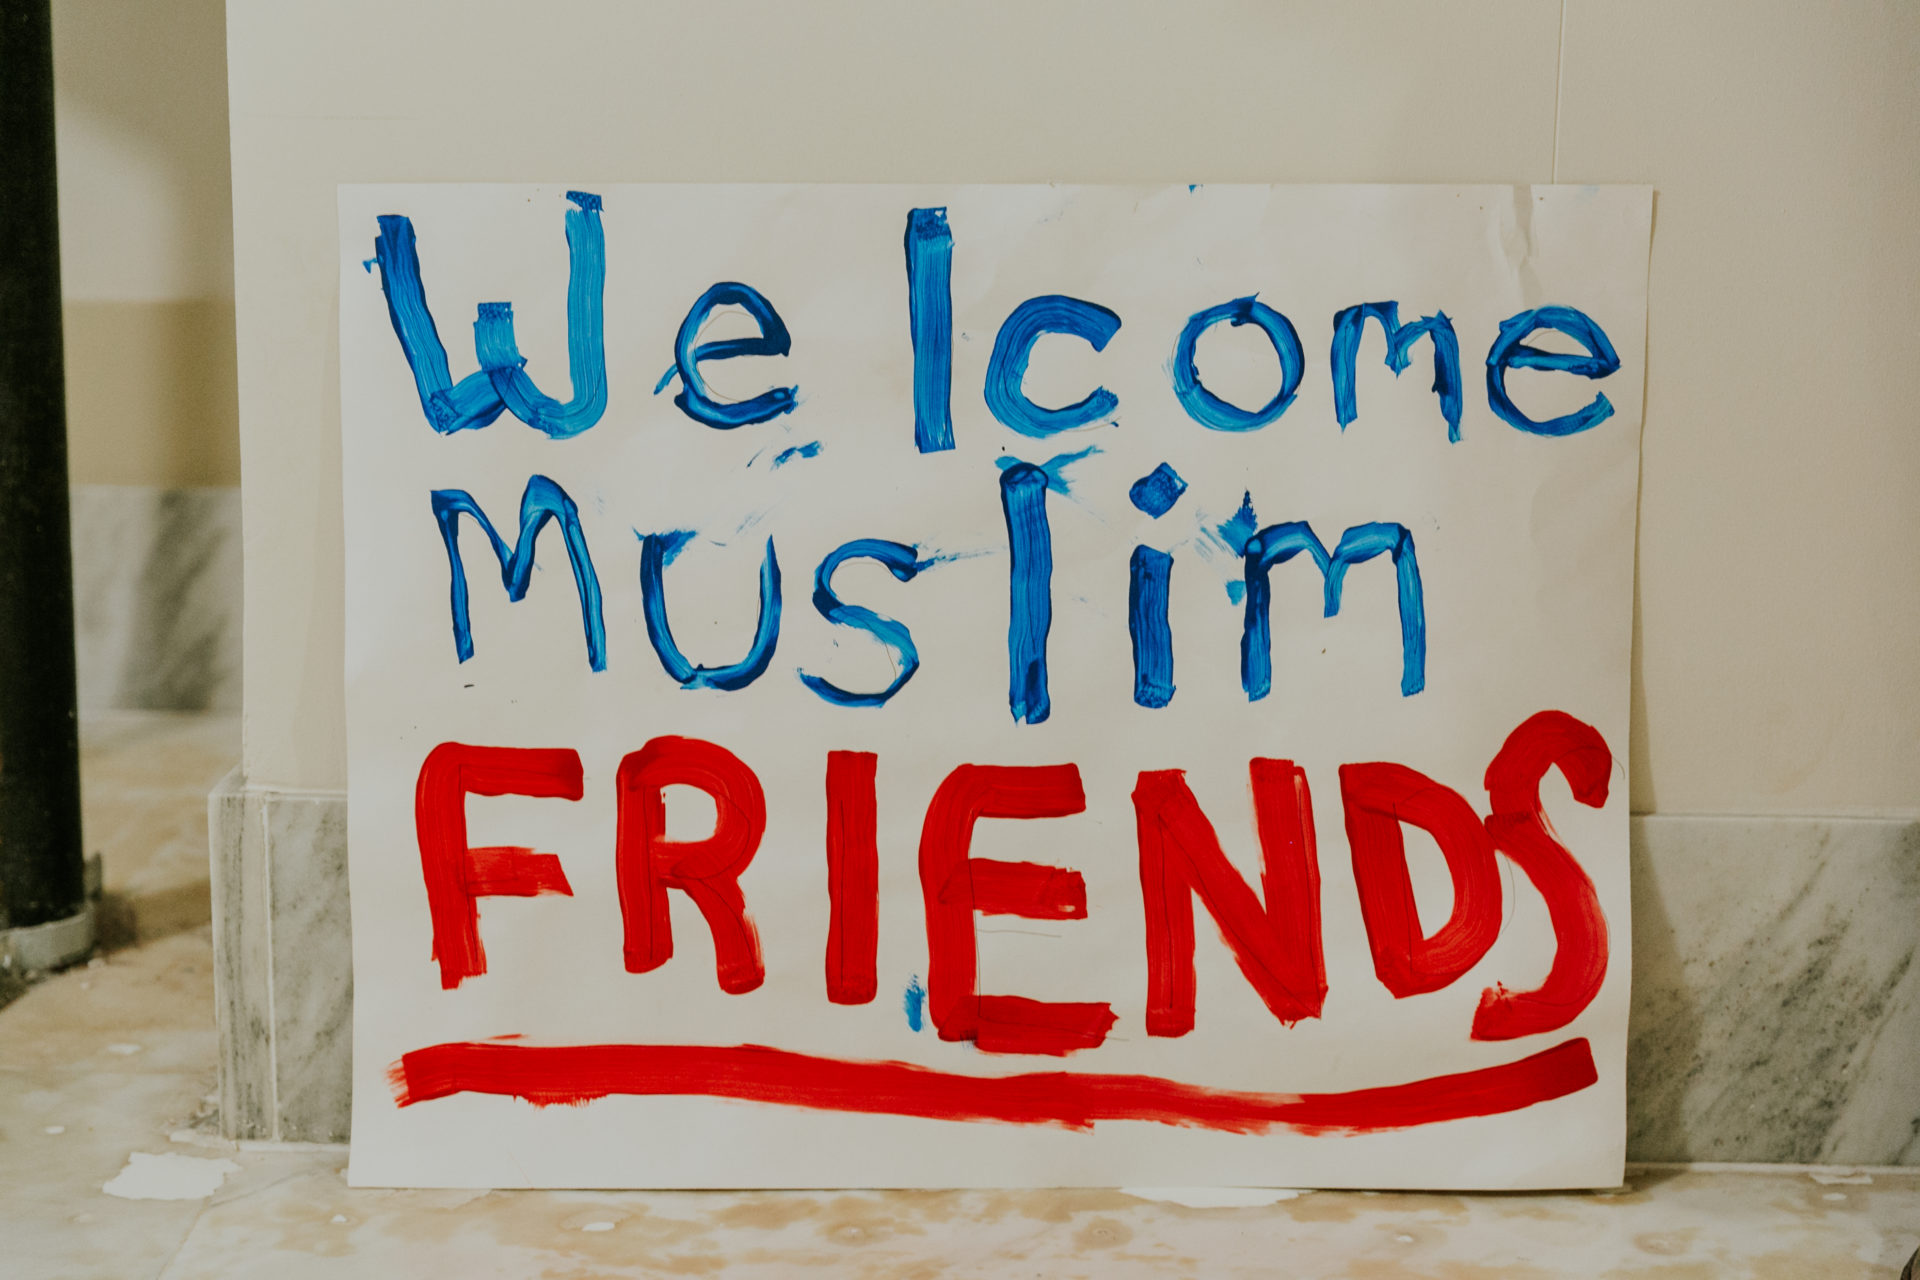 Interfaith Group Gathers in Oklahoma City to Pray for Syrian Refugees